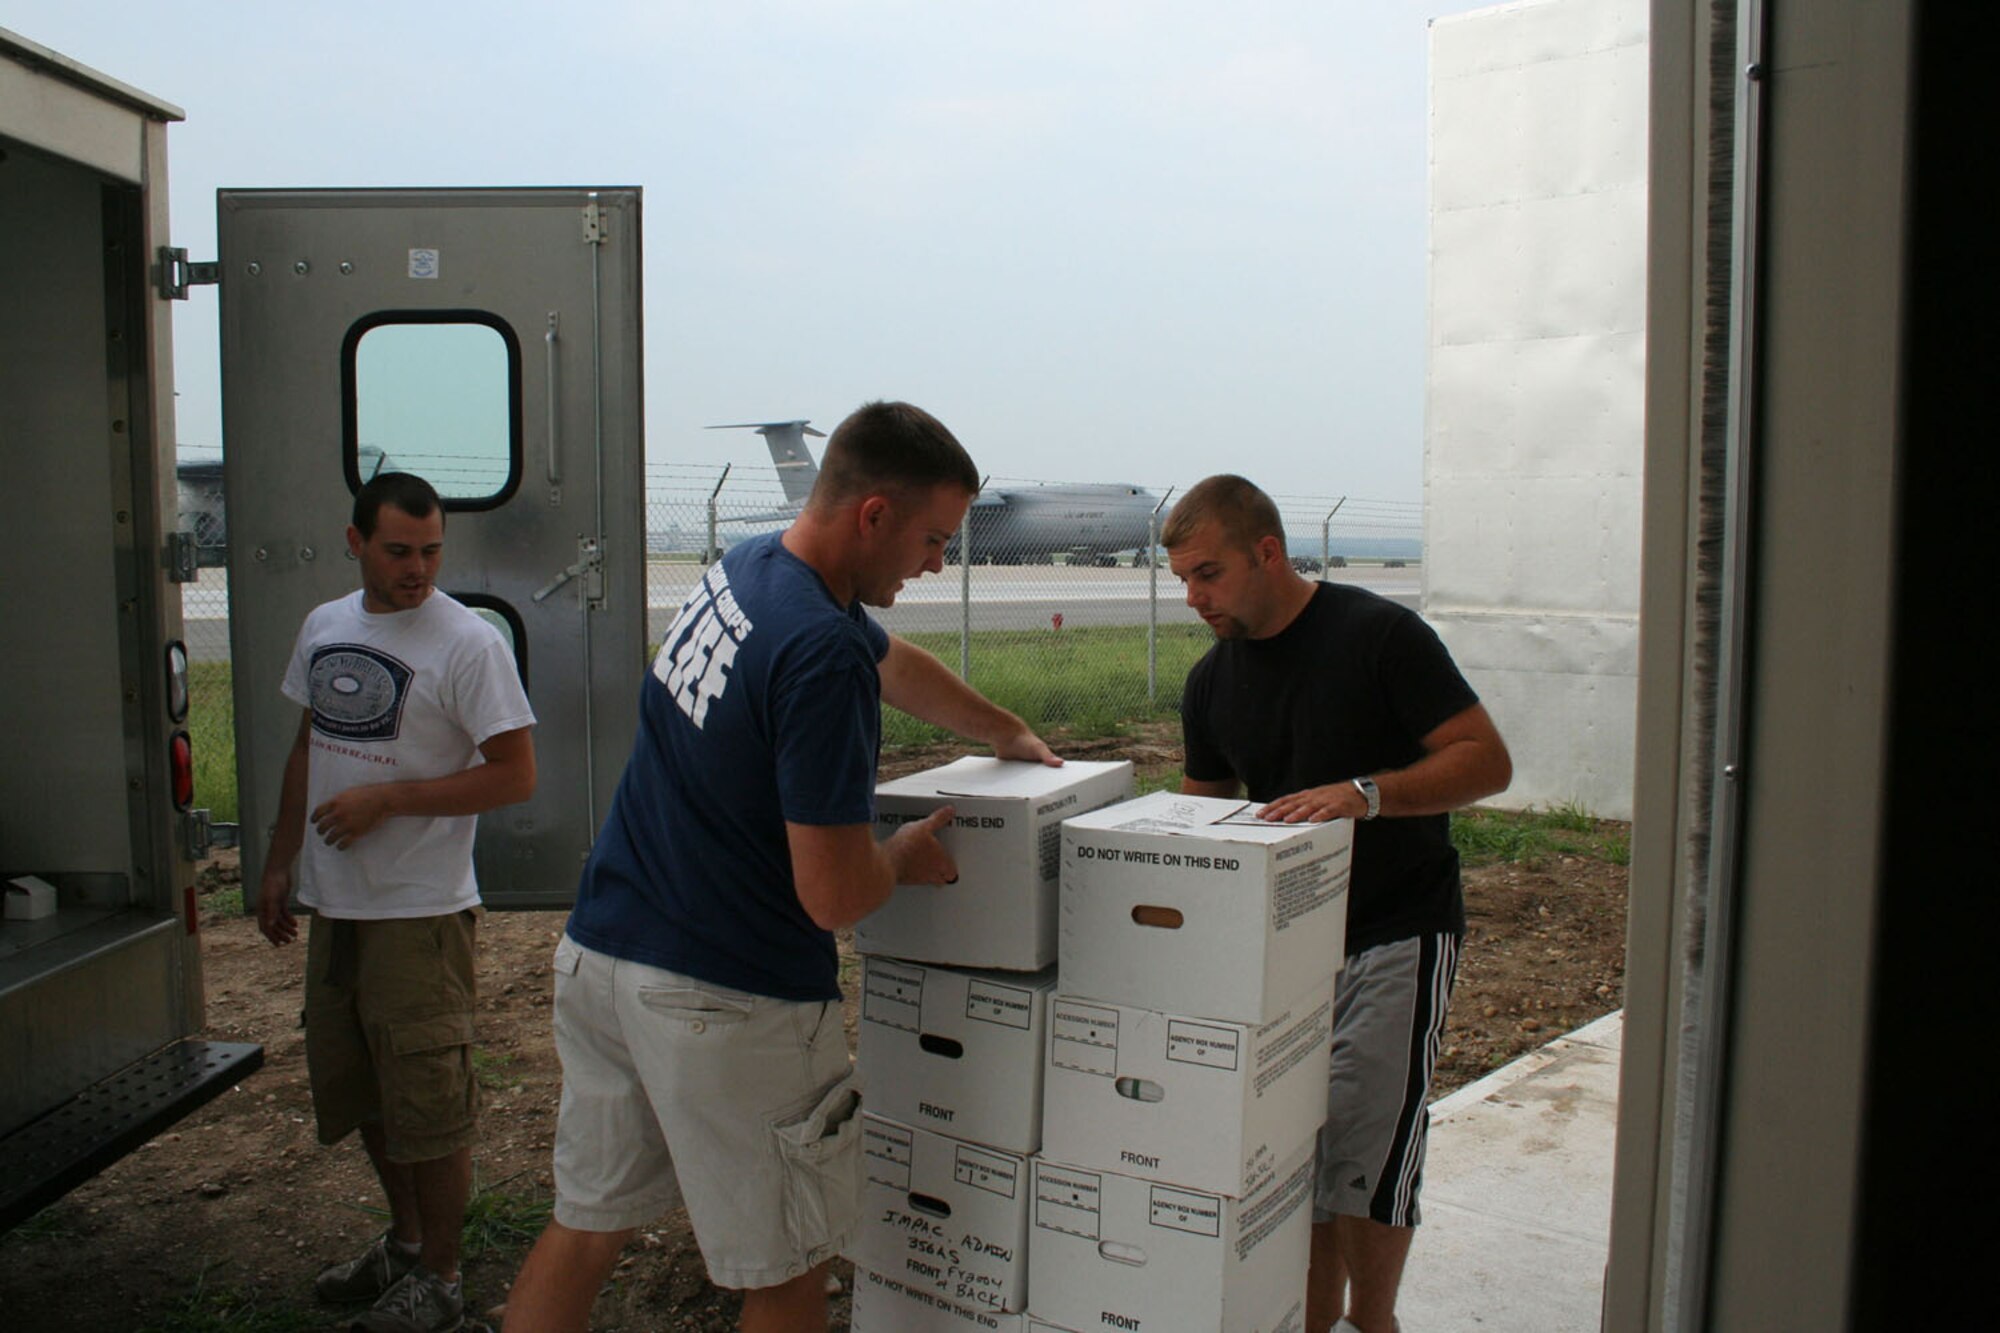 WRIGHT-PATTERSON AFB, Ohio - Reservists from the 89th Airlift Squadron, left to right, Bryant Fox, Matt Pfeifer, and Blake LeMaster unload boxes into the new C-5 Squadron Operations Facility Sept. 6, 2007. The new building will support squadron operations; this includes aircrew, life support, intelligence, training, and office space.  (U.S. Air Force photo/Mary Allen)      